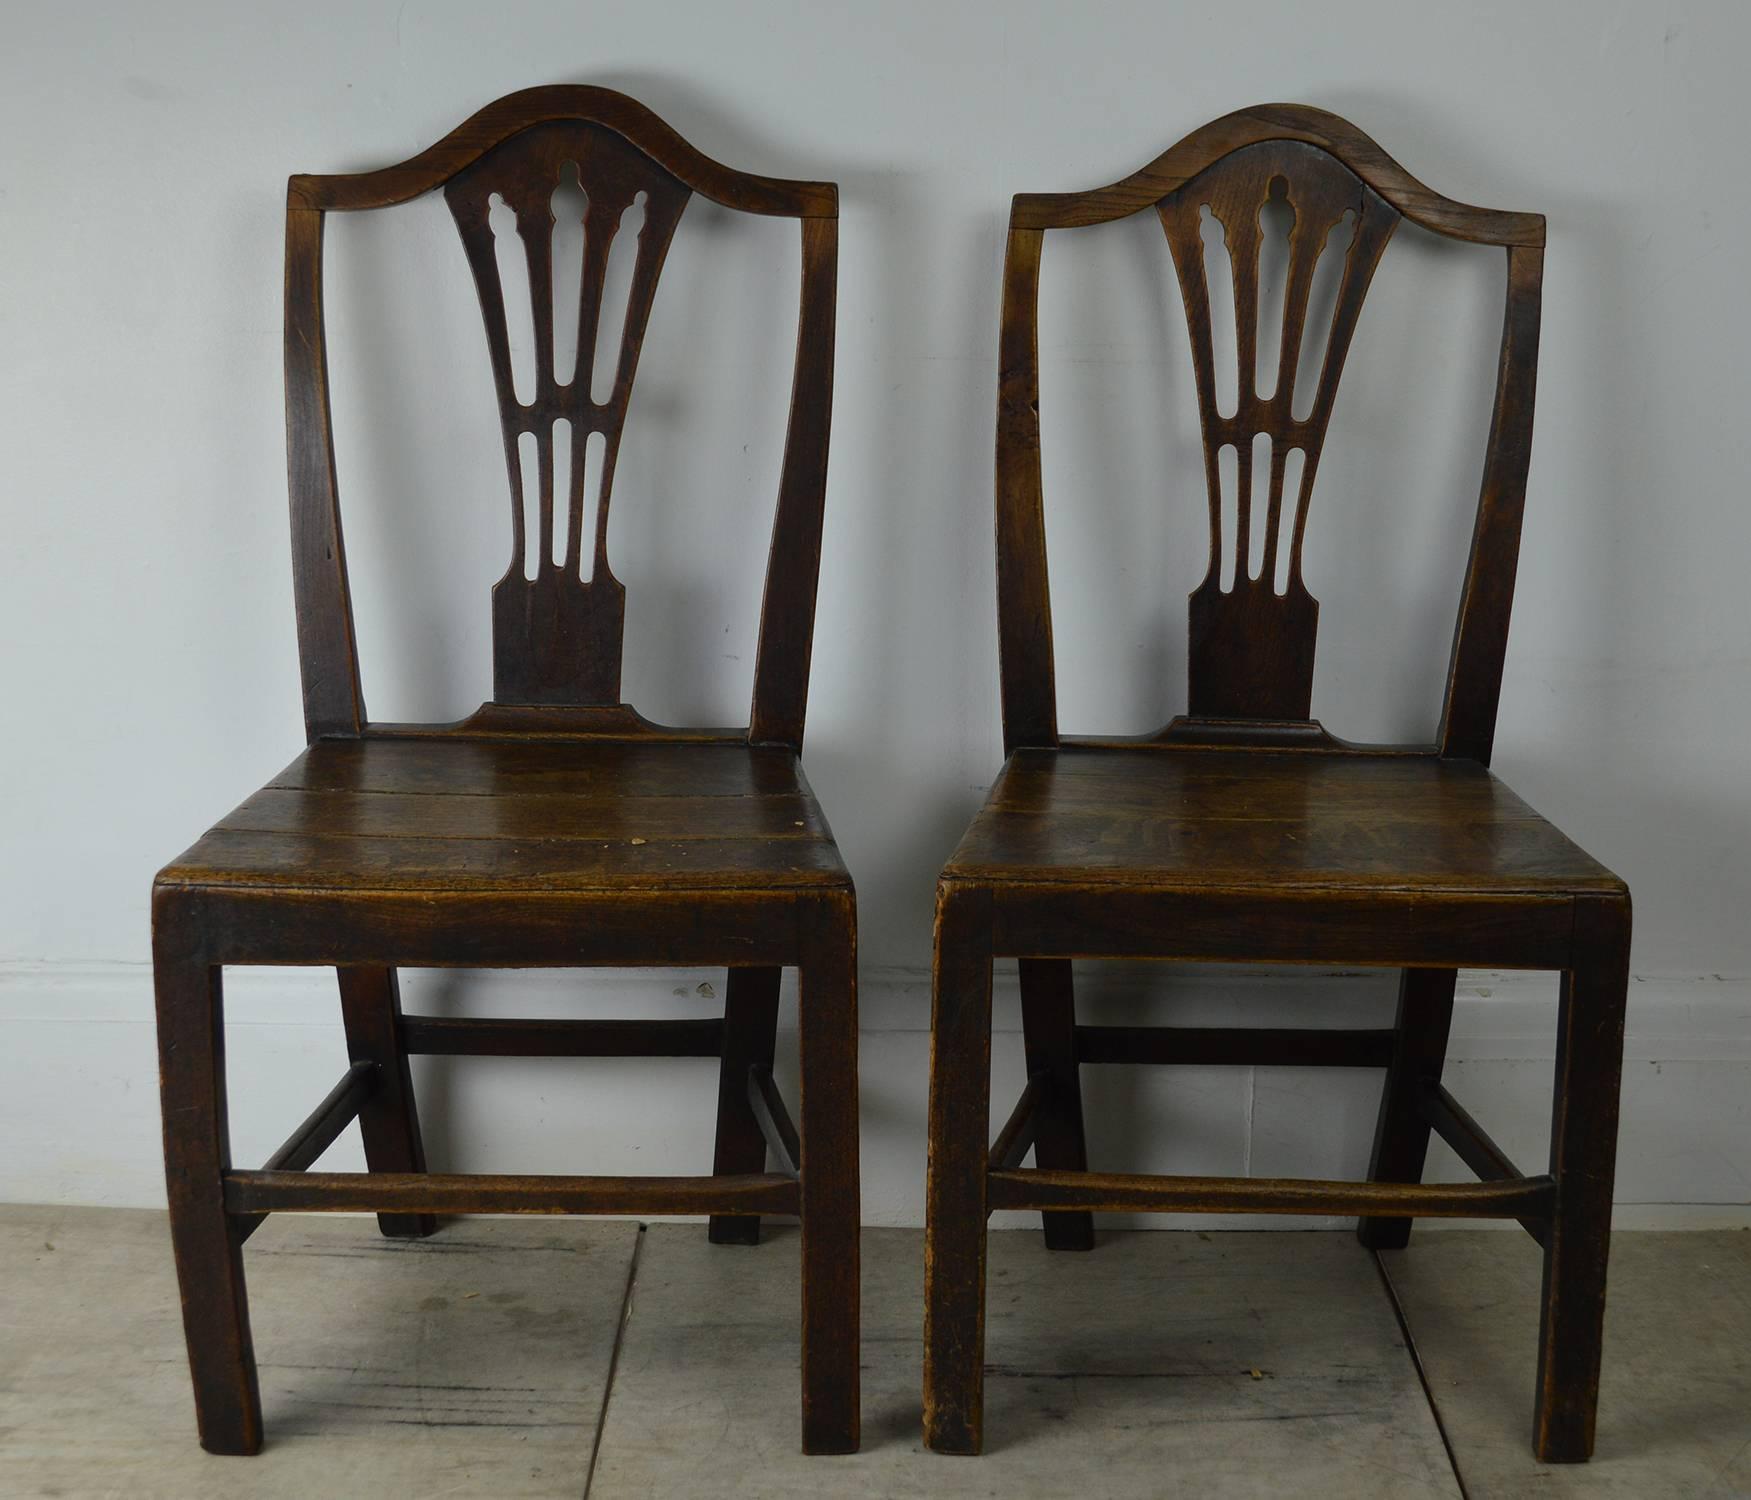 Pair of country Hepplewhite dining chairs.

A wonderful naive charm about these chairs.

Totally original, great color and patina.

Although they are English chairs there is an element of the Gustavian about them.

Sound